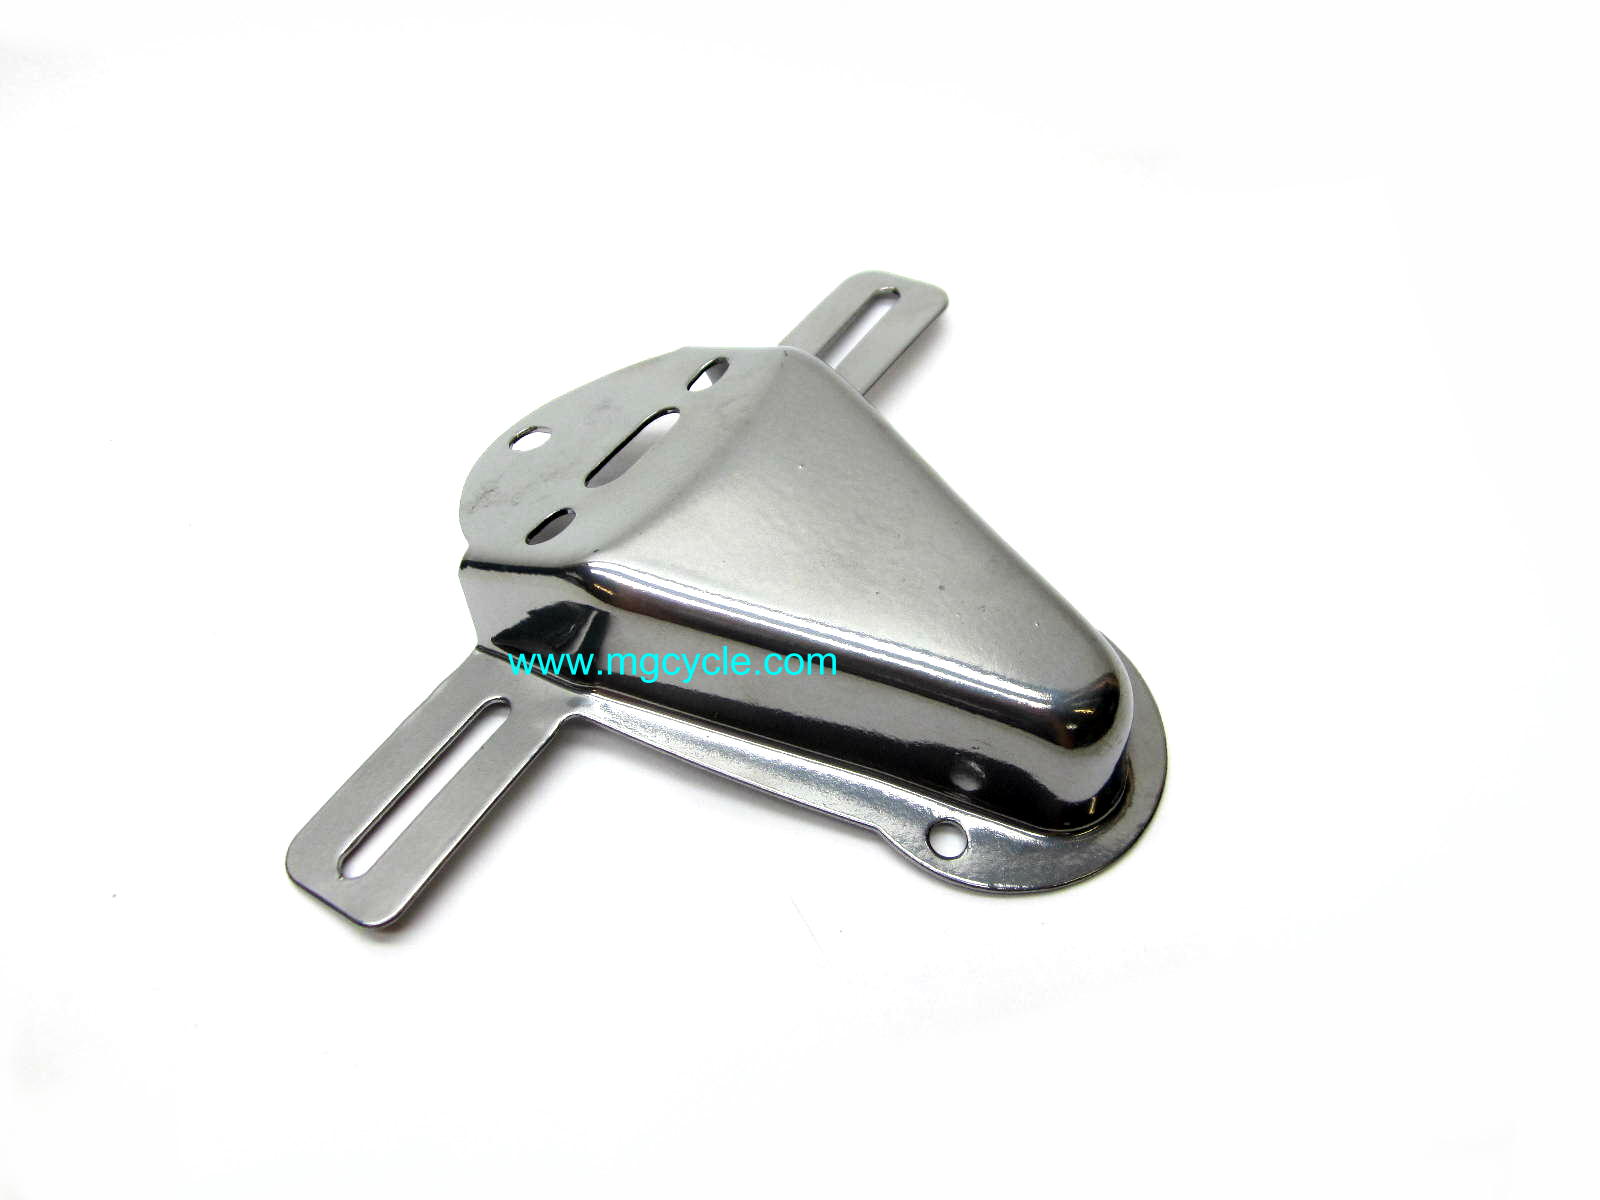 Tail light mounting bracket, as used on CEV tail lights